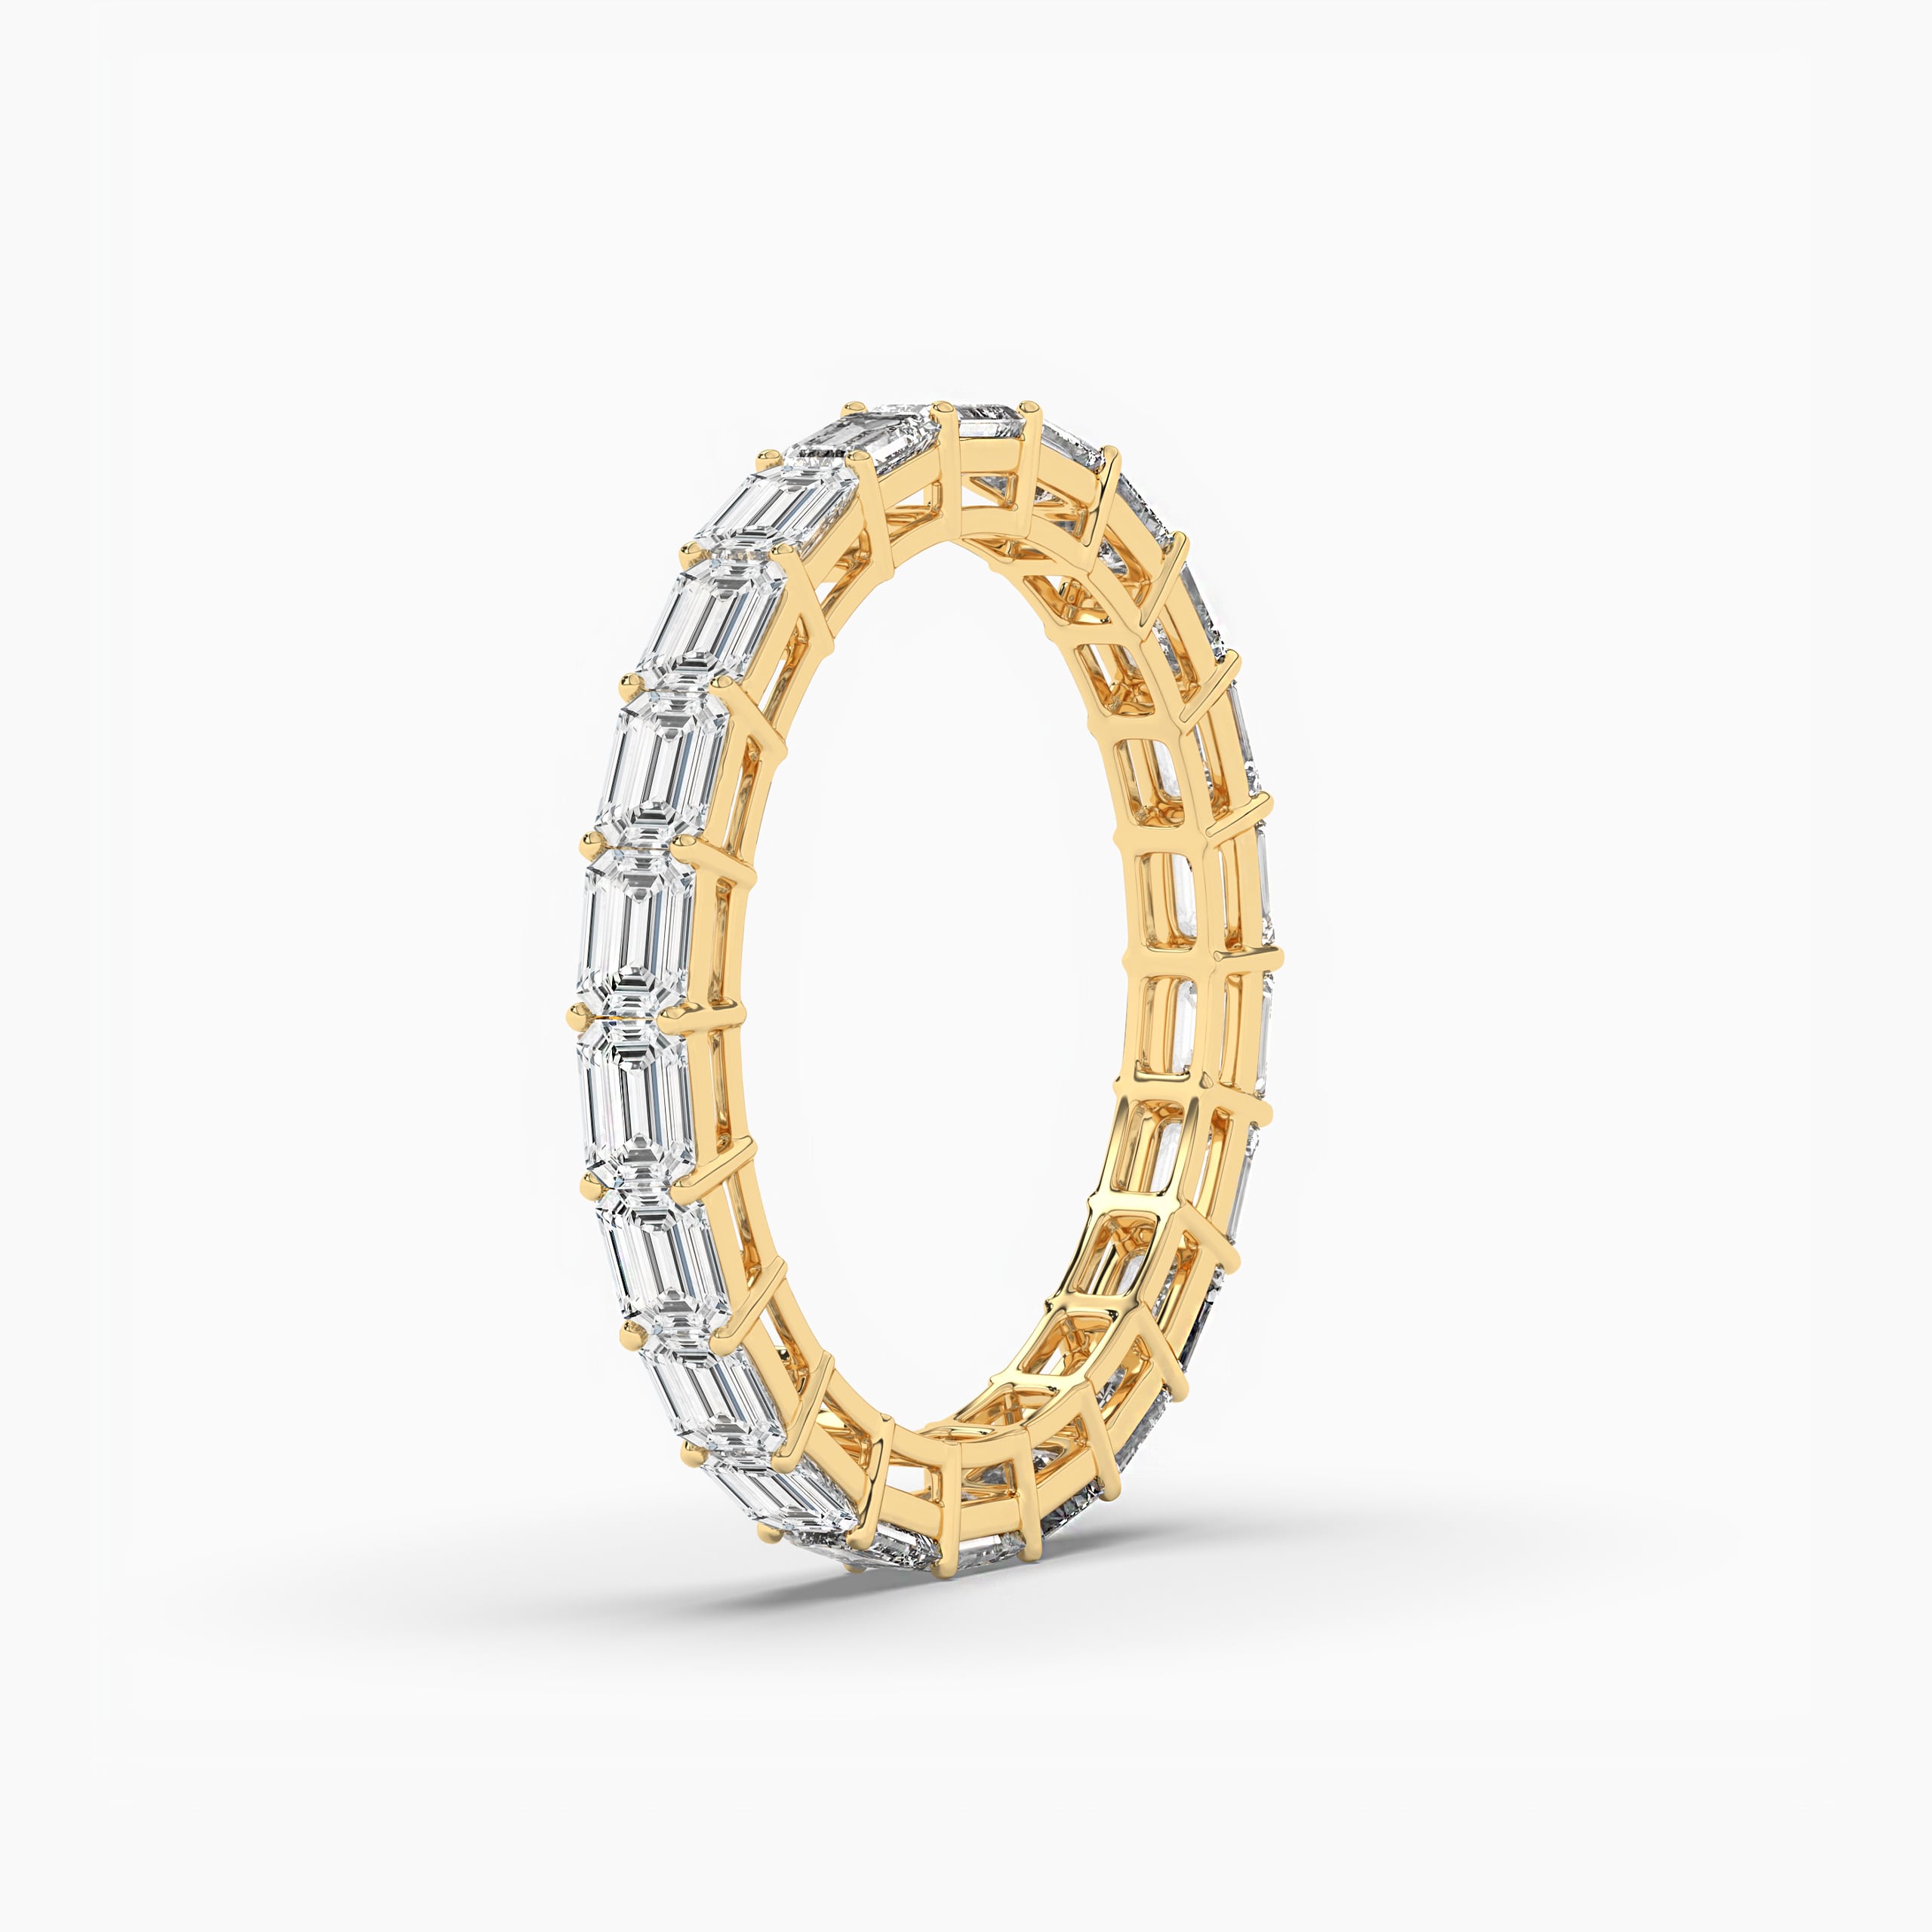 Diamond Emerald Cut East to West Eternity Ring